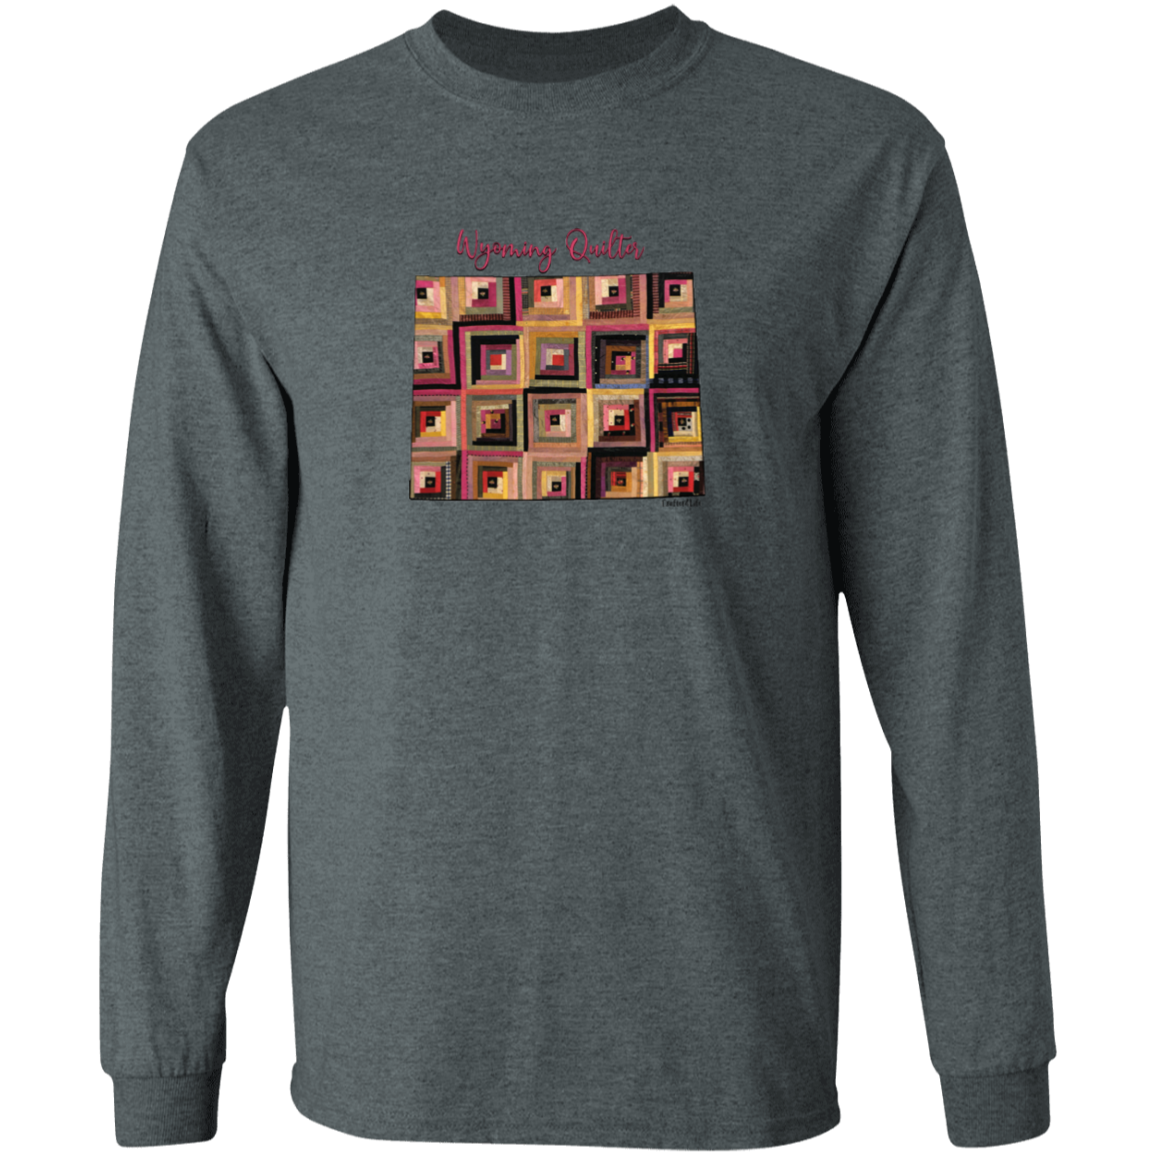 Wyoming Quilter Long Sleeve T-Shirt, Gift for Quilting Friends and Family